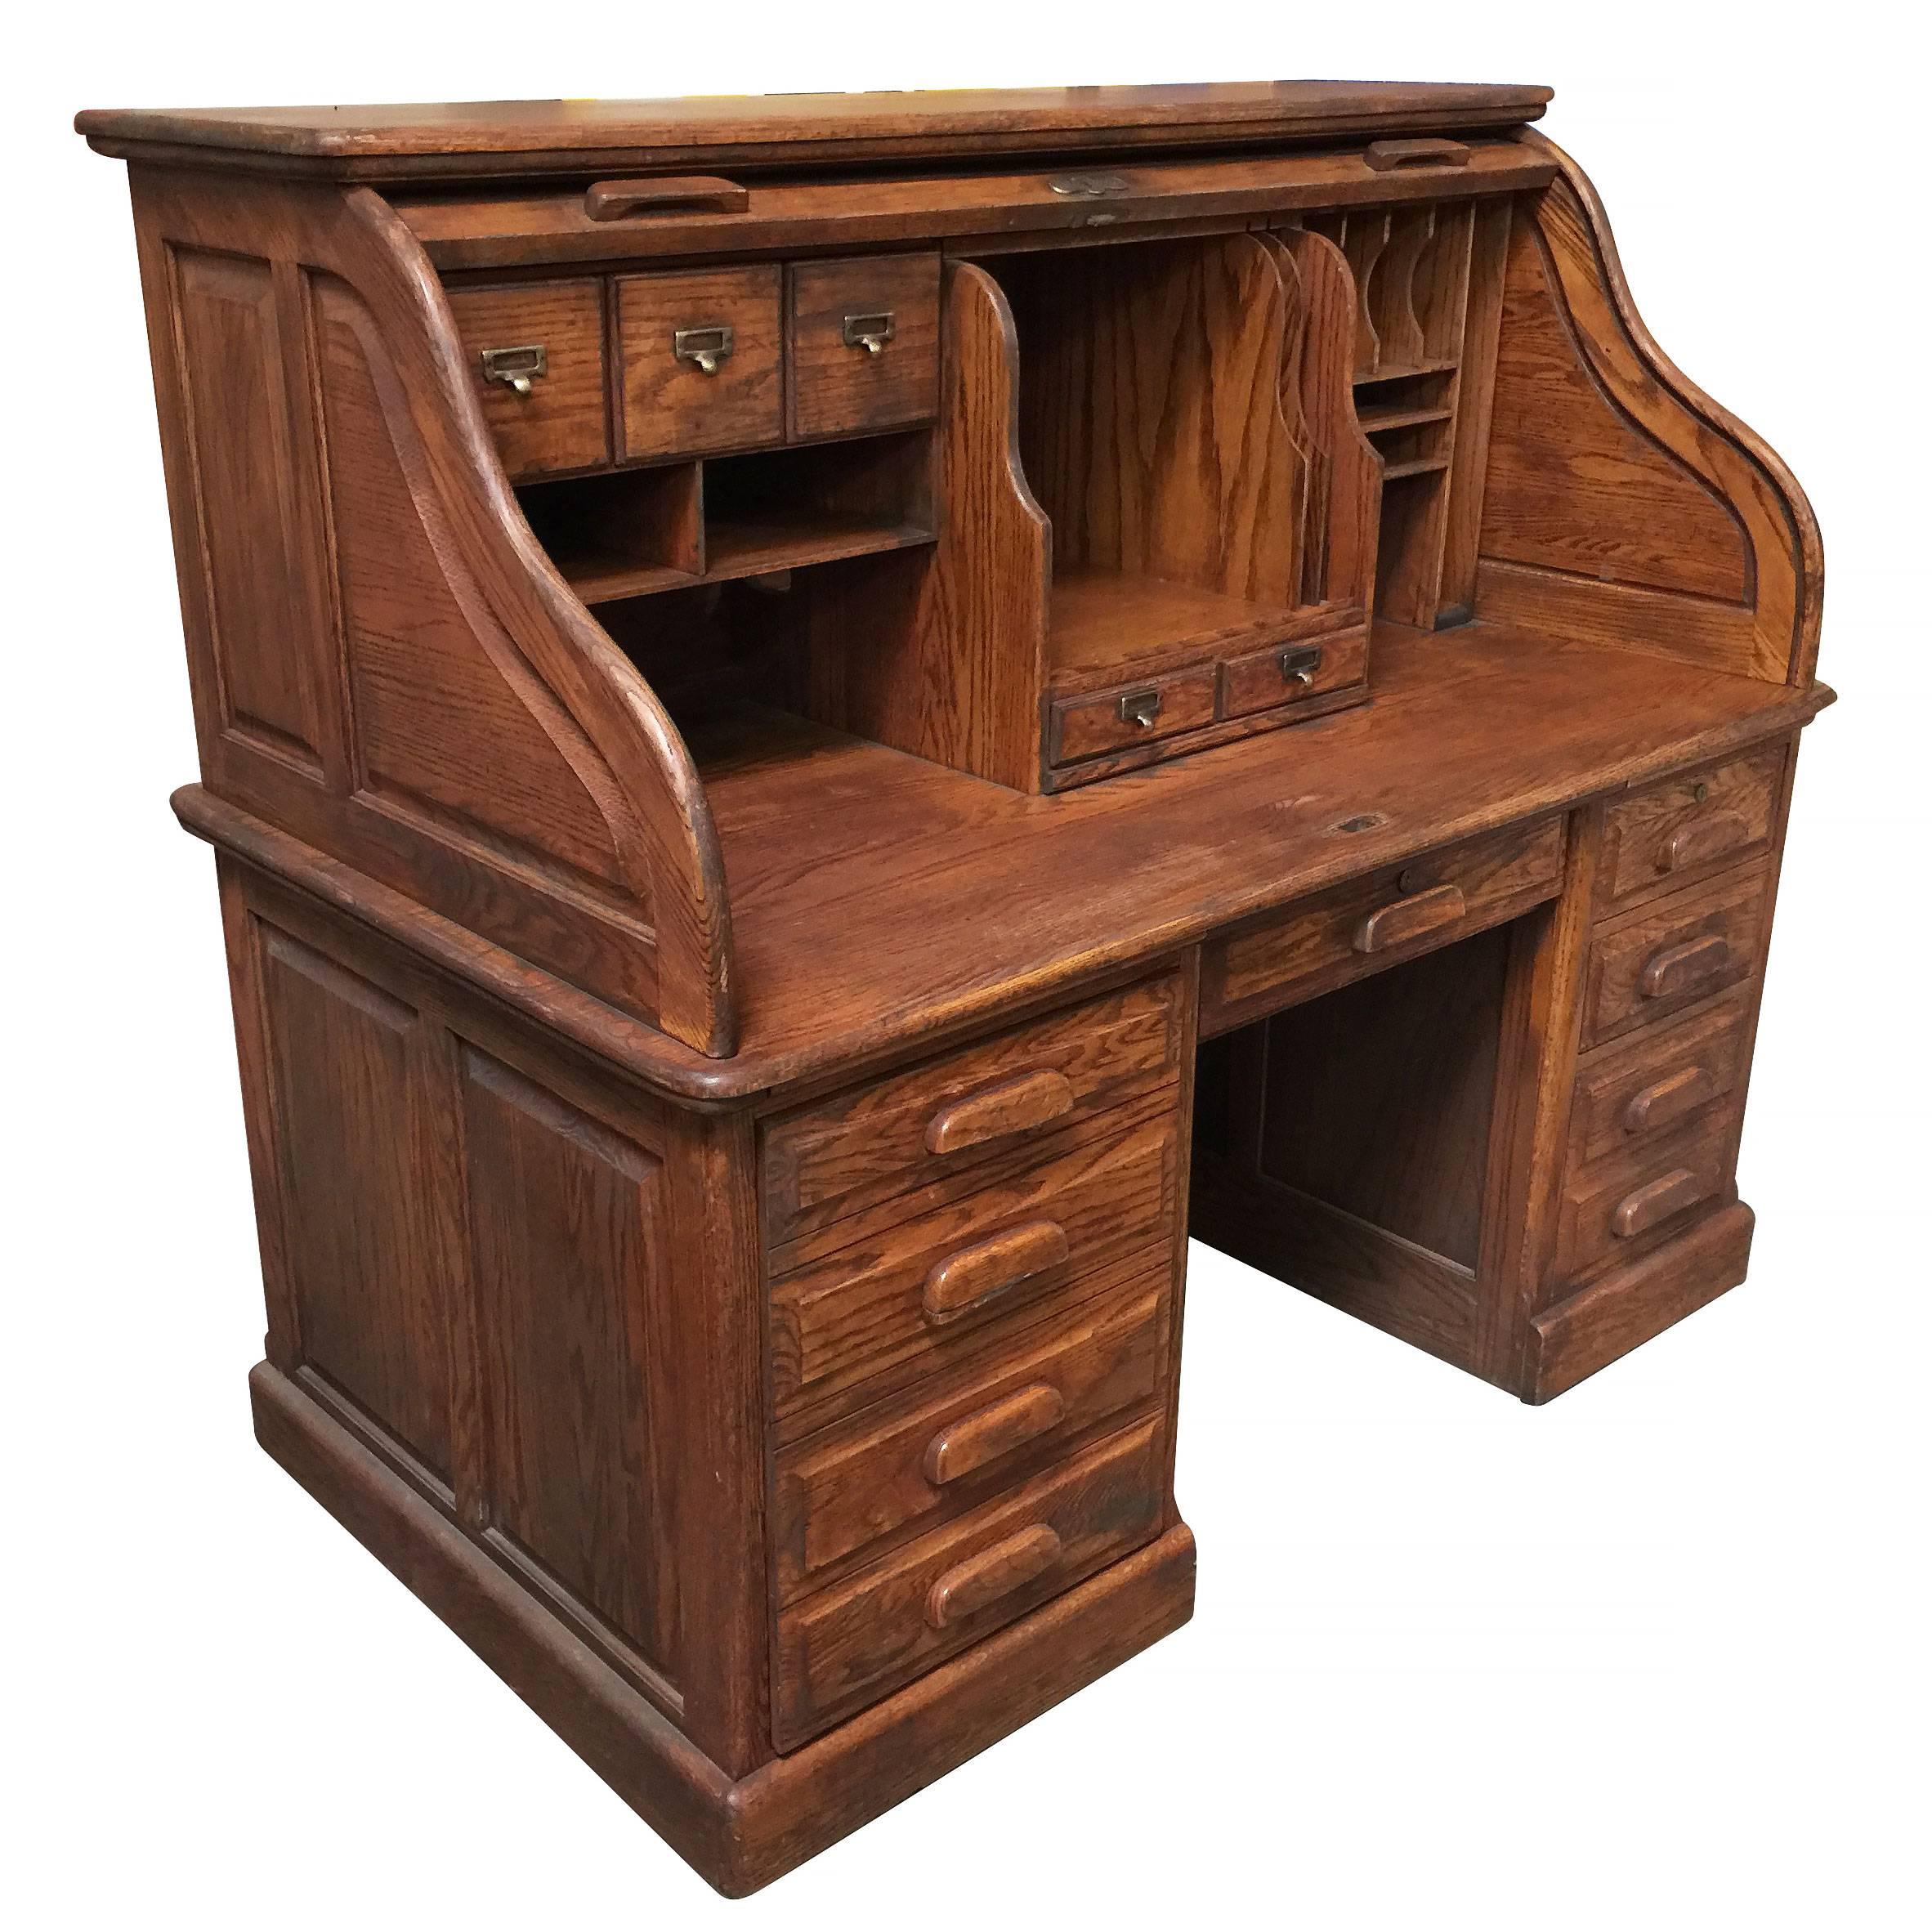 Mission style hardwood roll up desk by Stuarts featuring a keyboard drawer and large pull-out drawer to fit a computer tower.